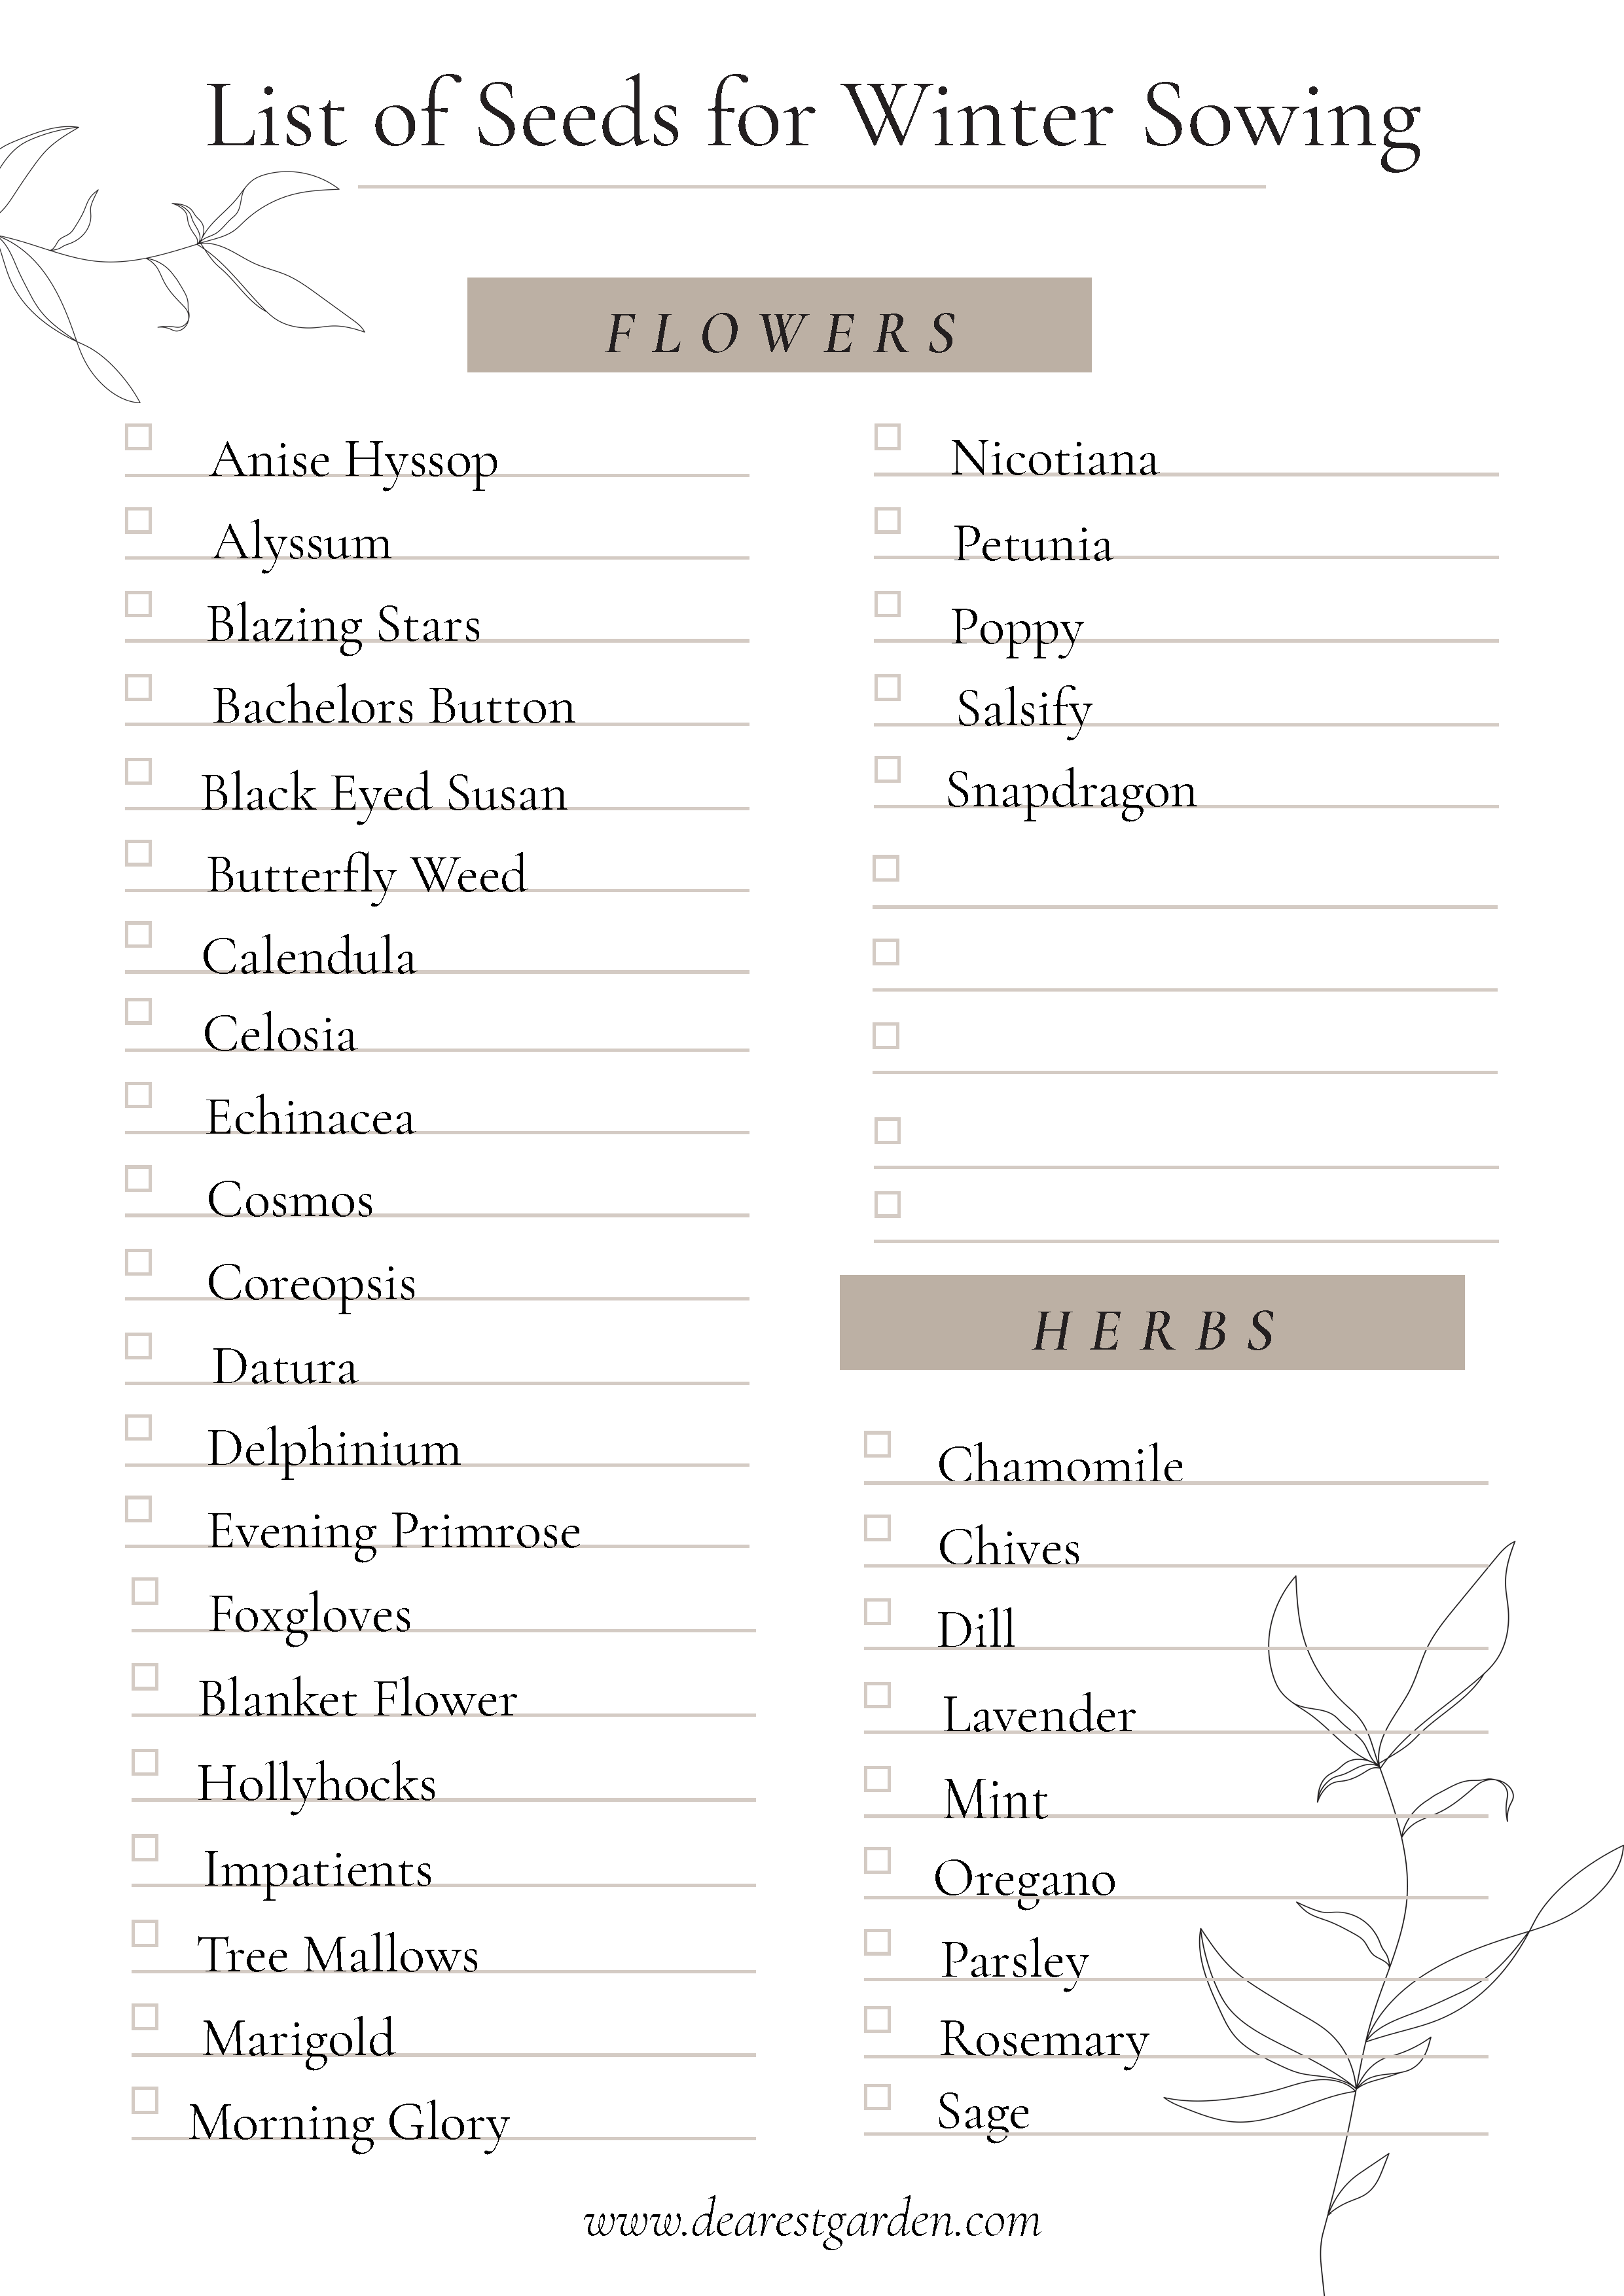 Seeds for Winter Sowing Check List Final PDF_Page_1.png